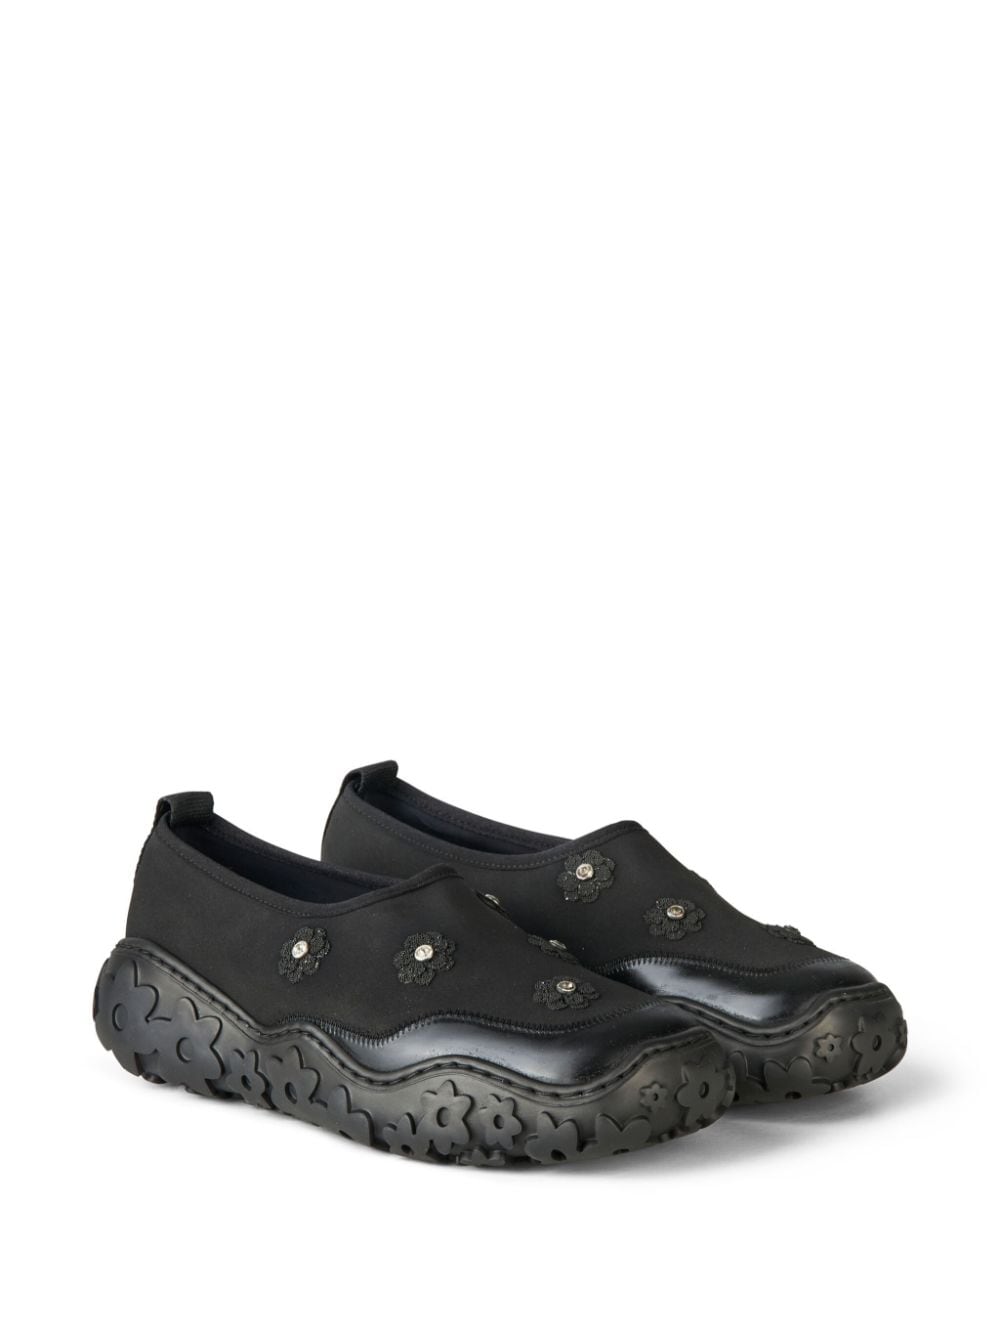 Image 2 of Cecilie Bahnsen Glam slip-on sneakers